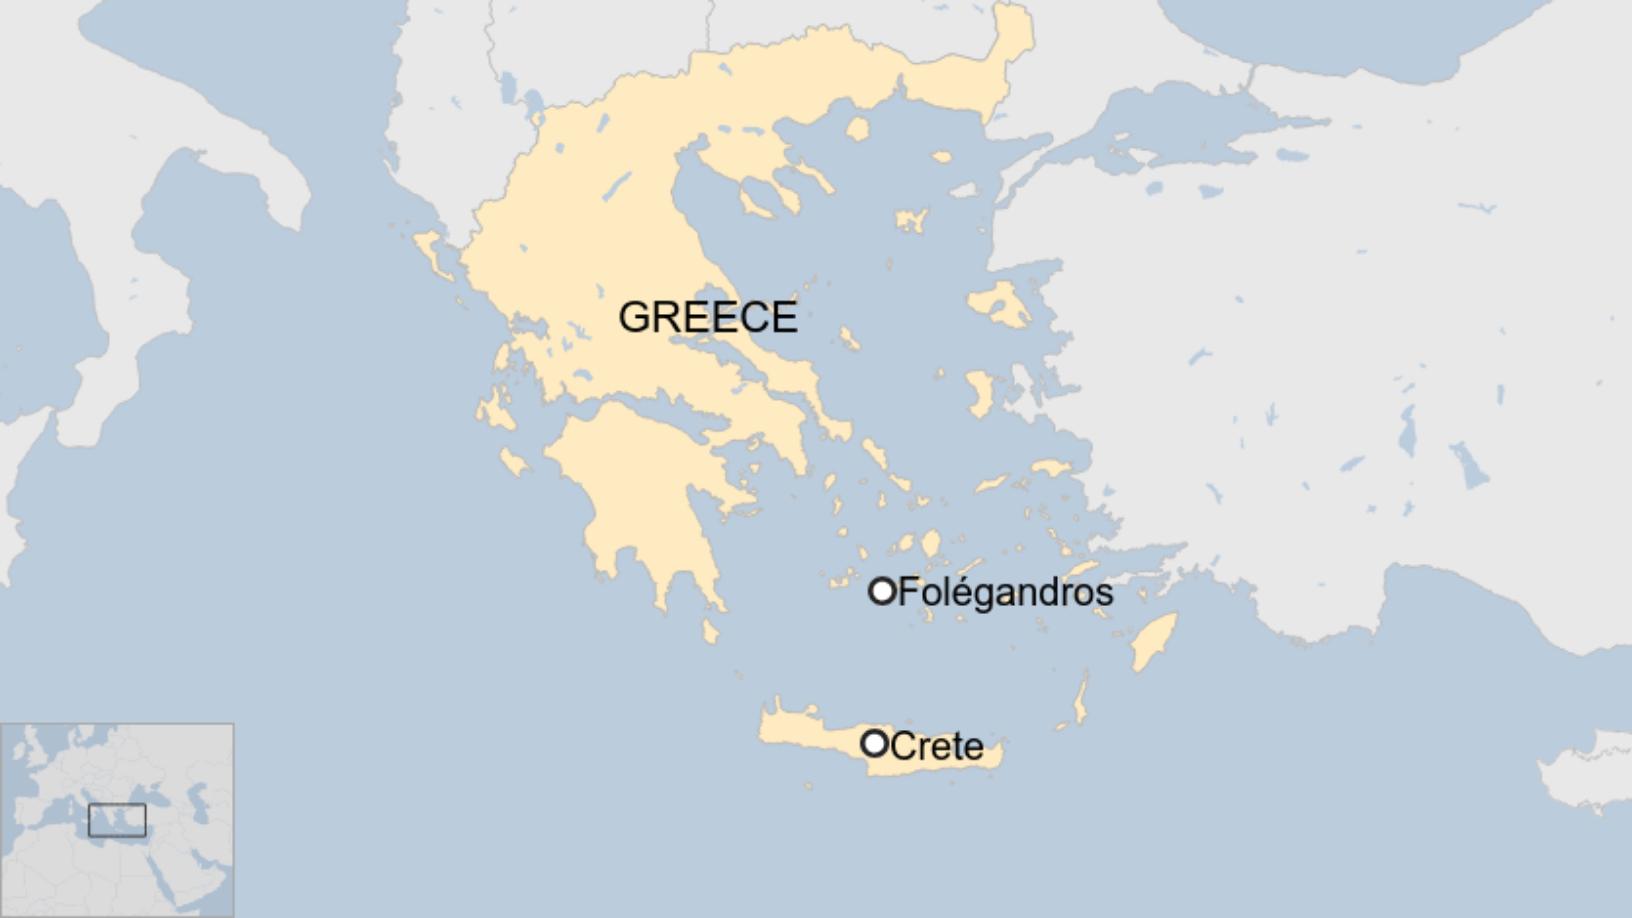 Map: A map showing where Crete and Folegandros are in Greece.